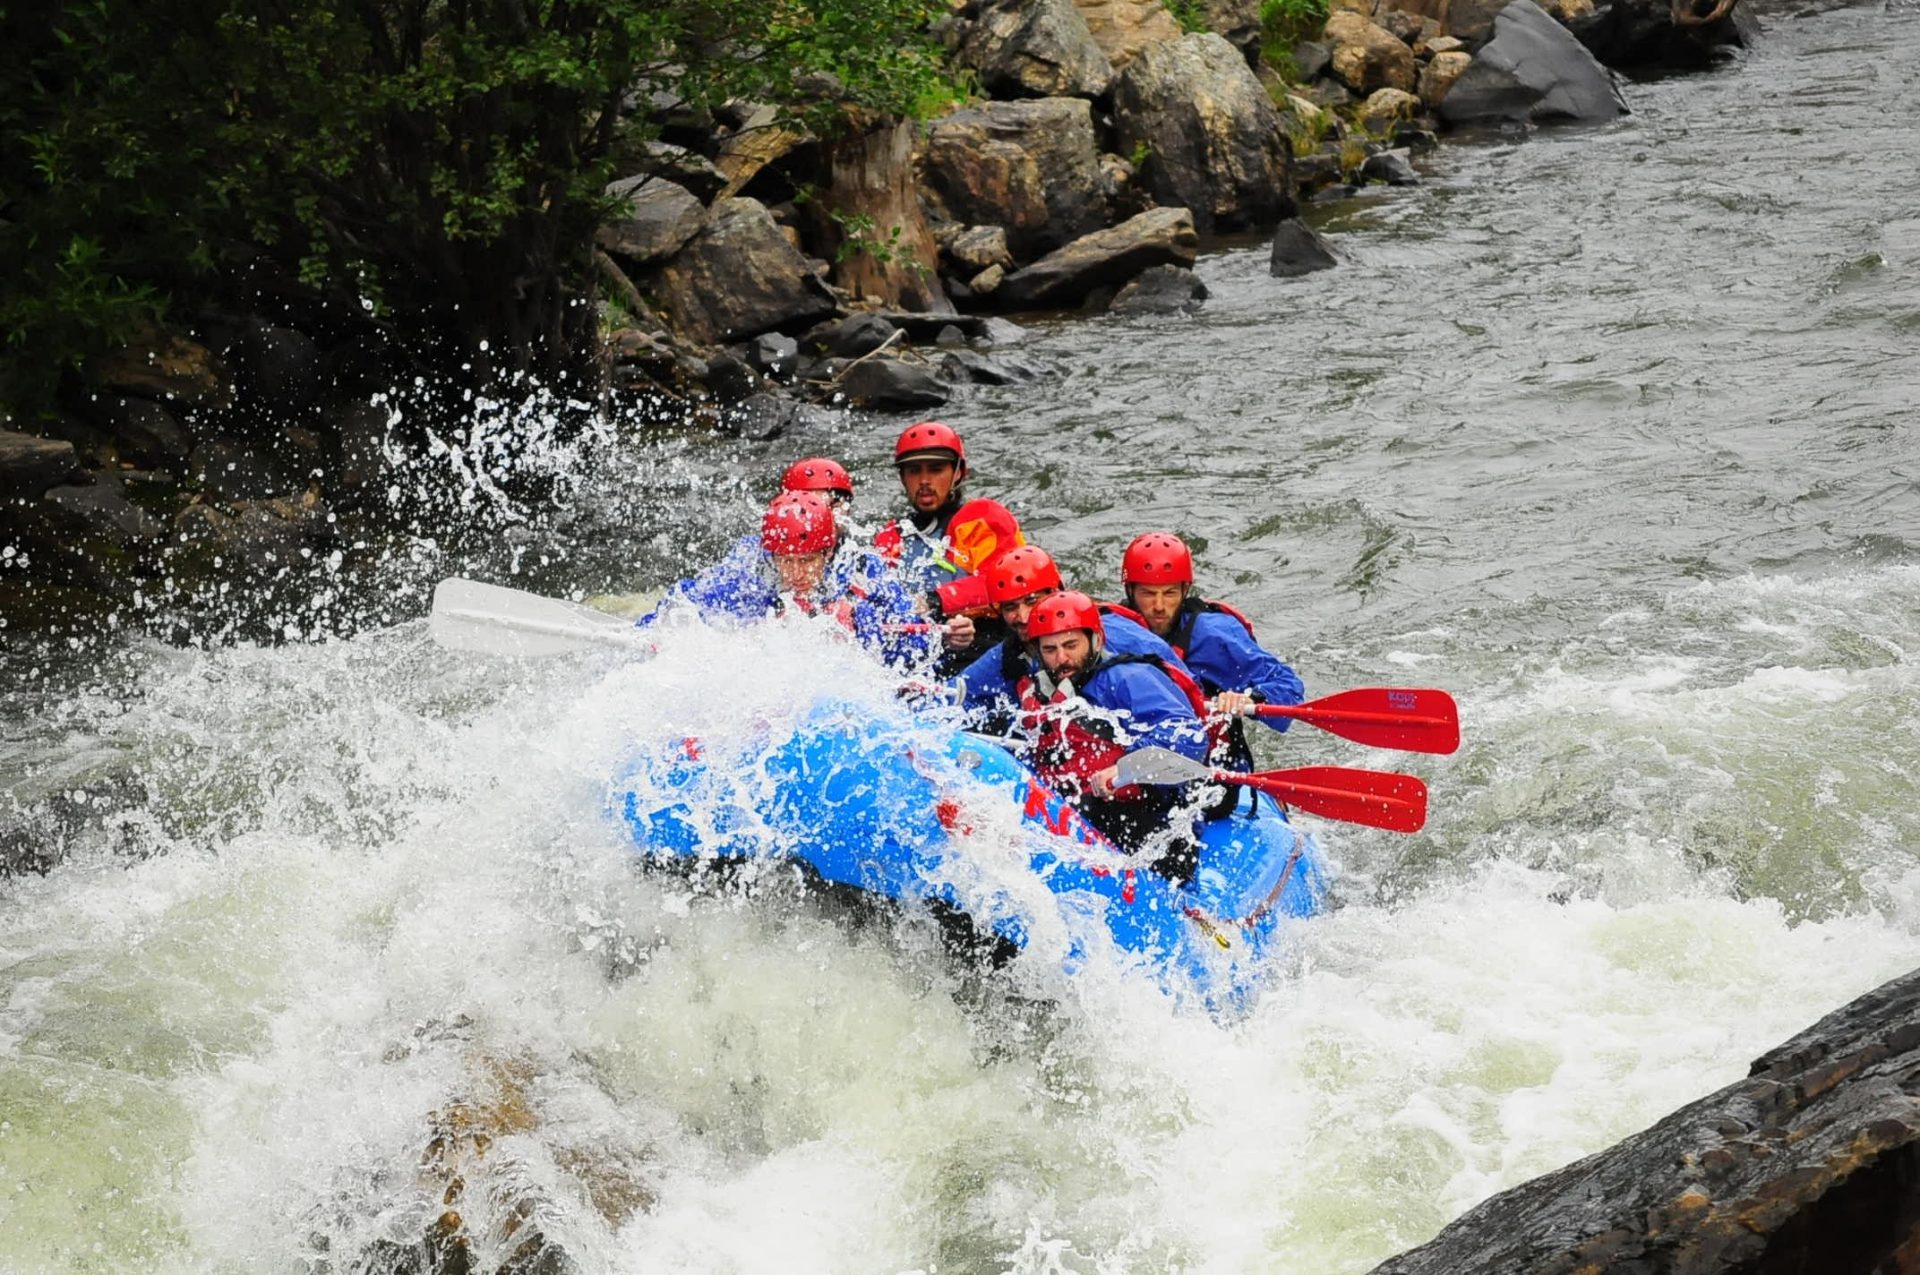 We recommend Clear Creek river rafting if you are ready to experience a challenging outdoor adenture